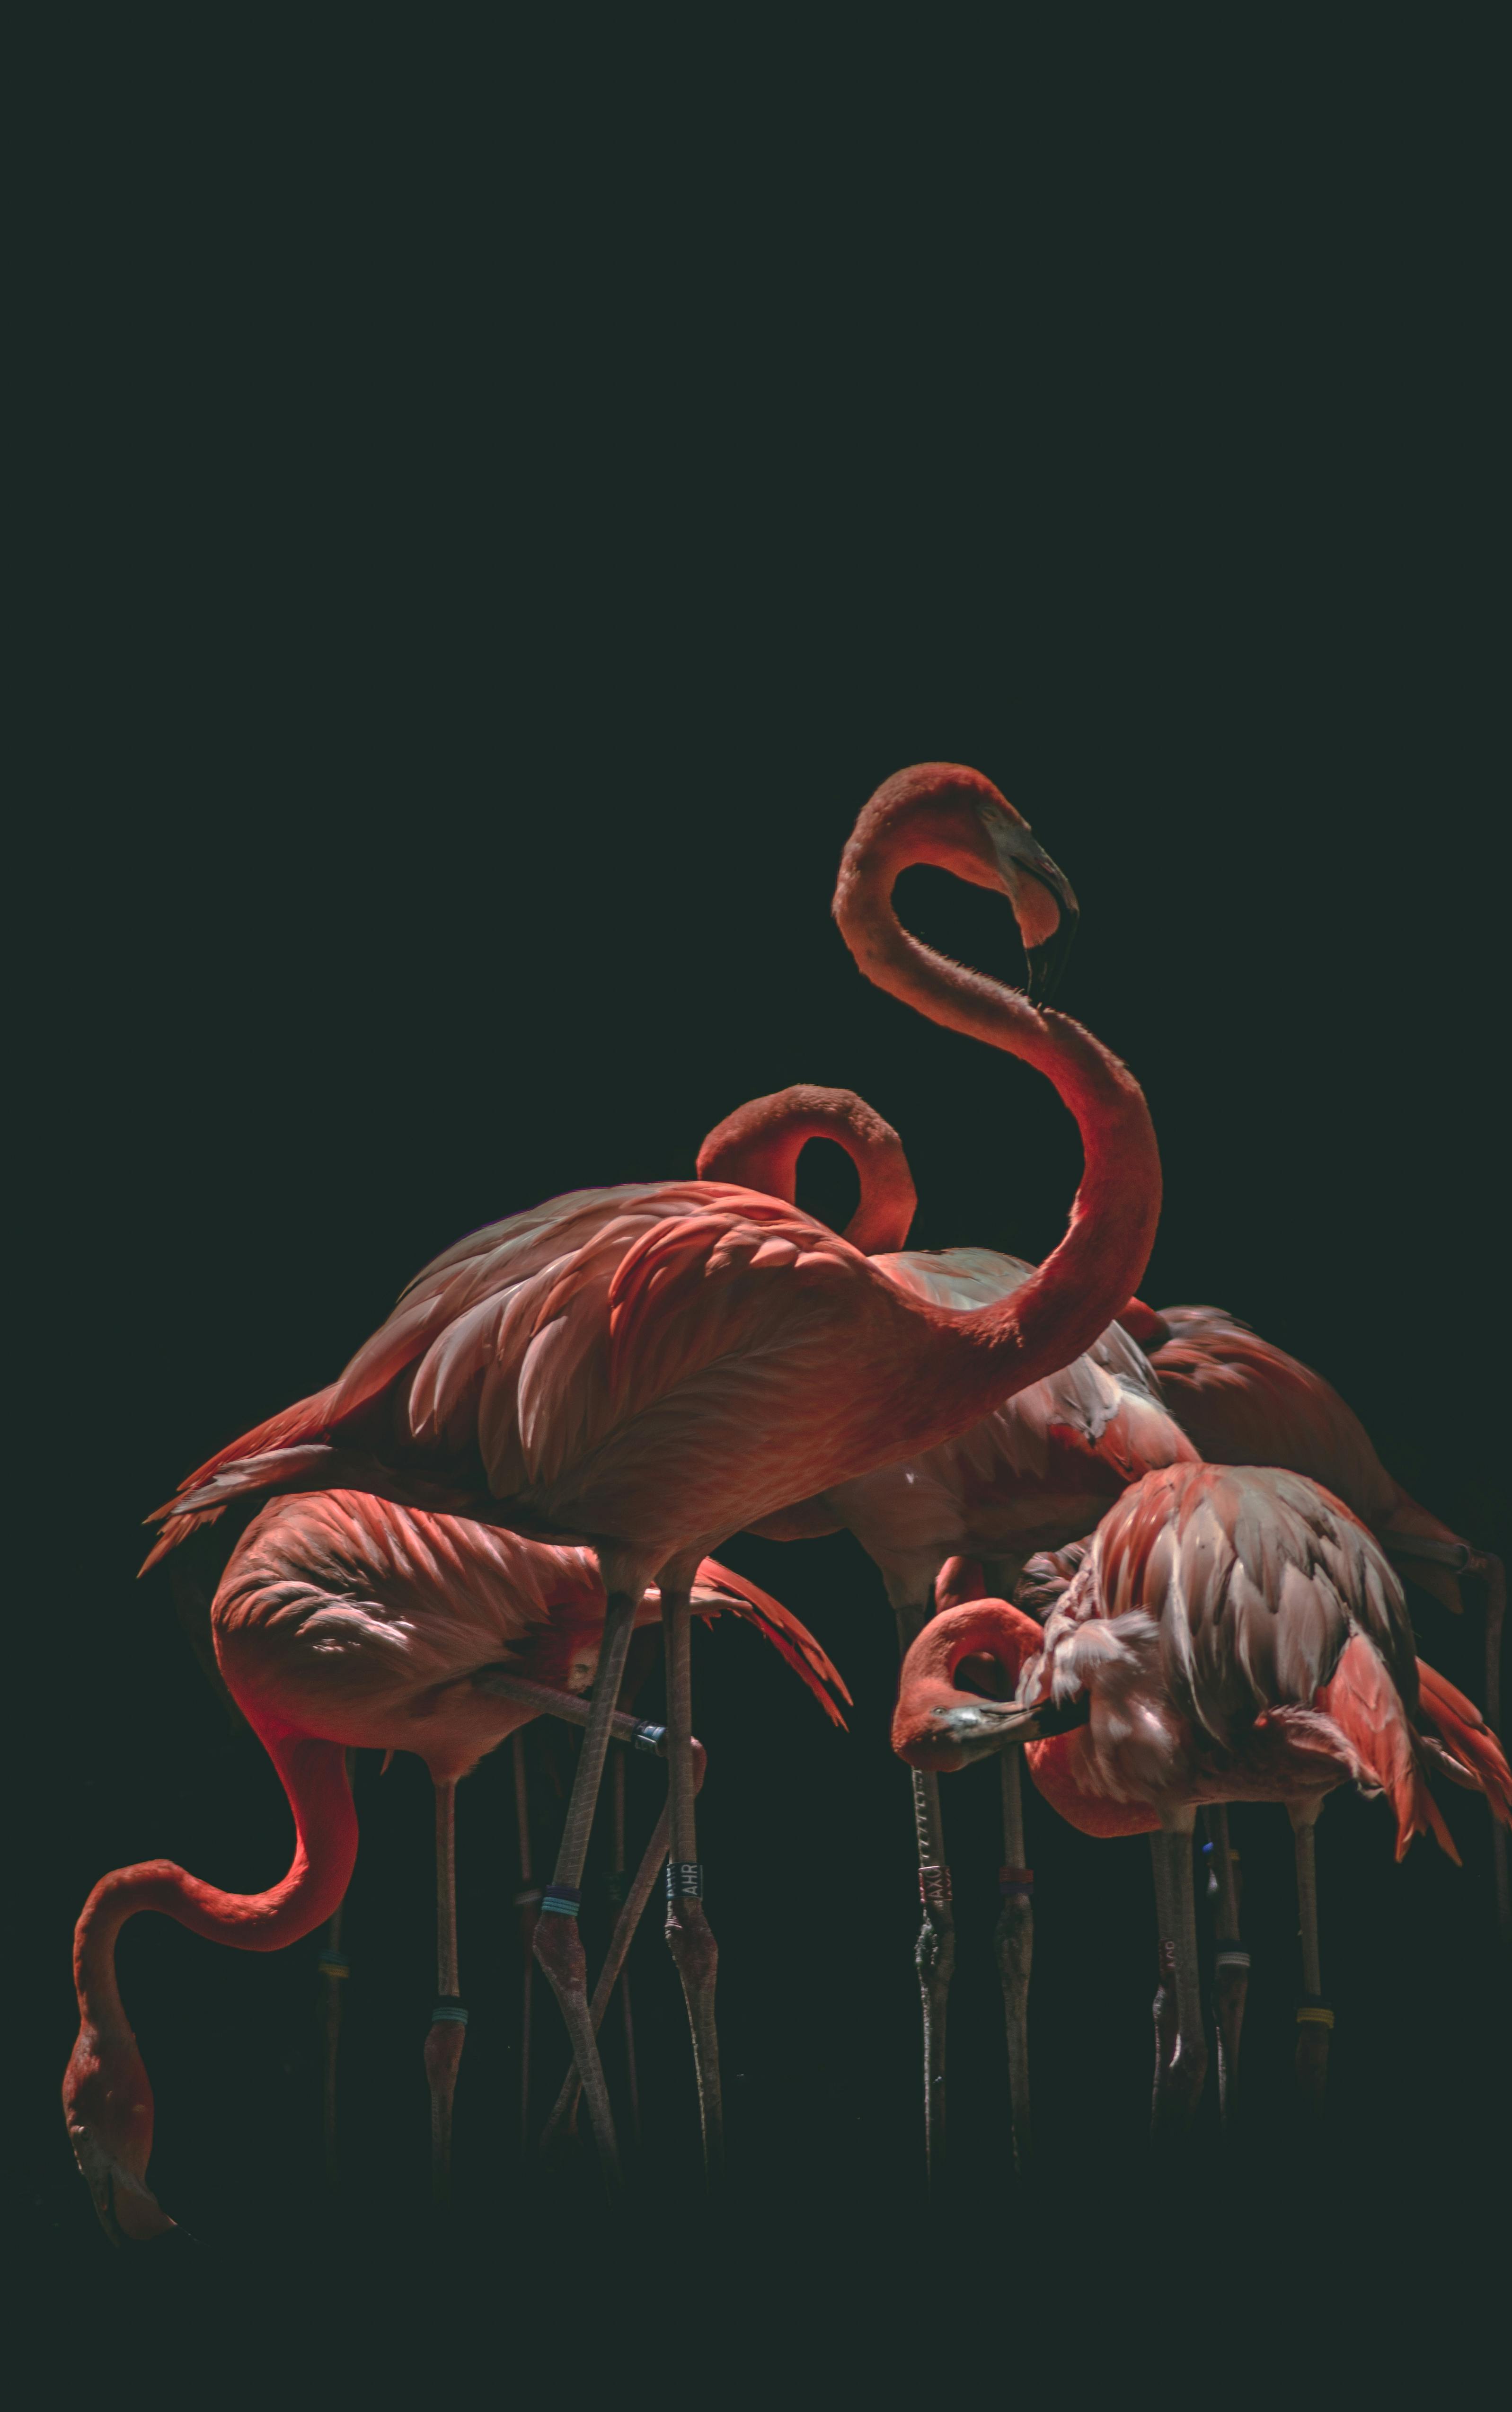 20 4K Flamingo Wallpapers  Background Images